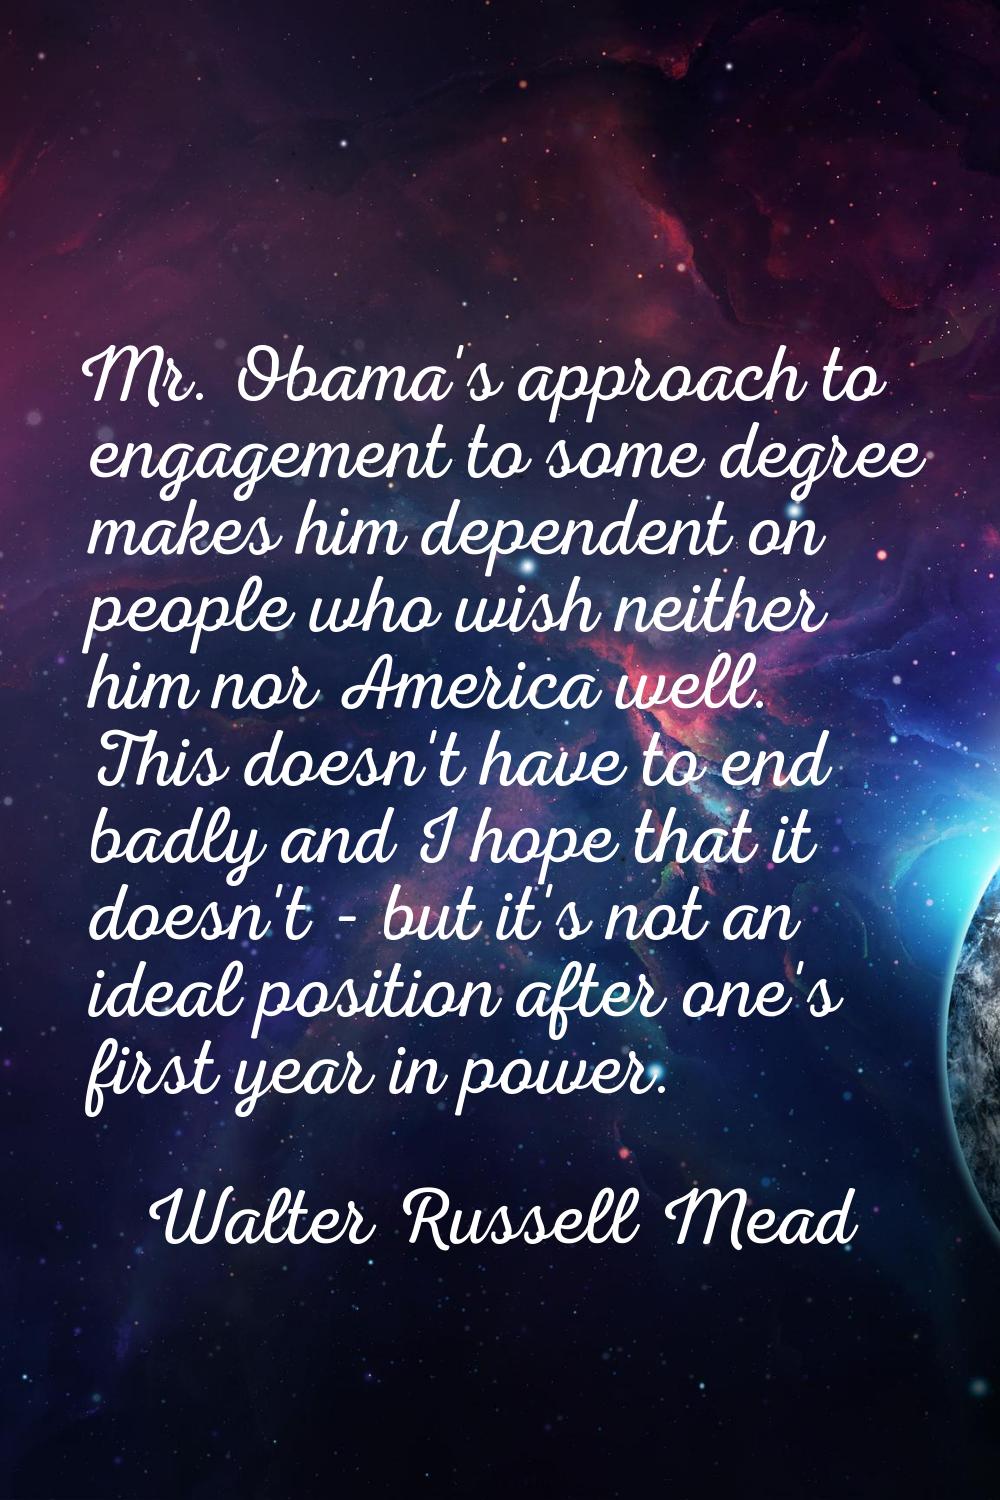 Mr. Obama's approach to engagement to some degree makes him dependent on people who wish neither hi